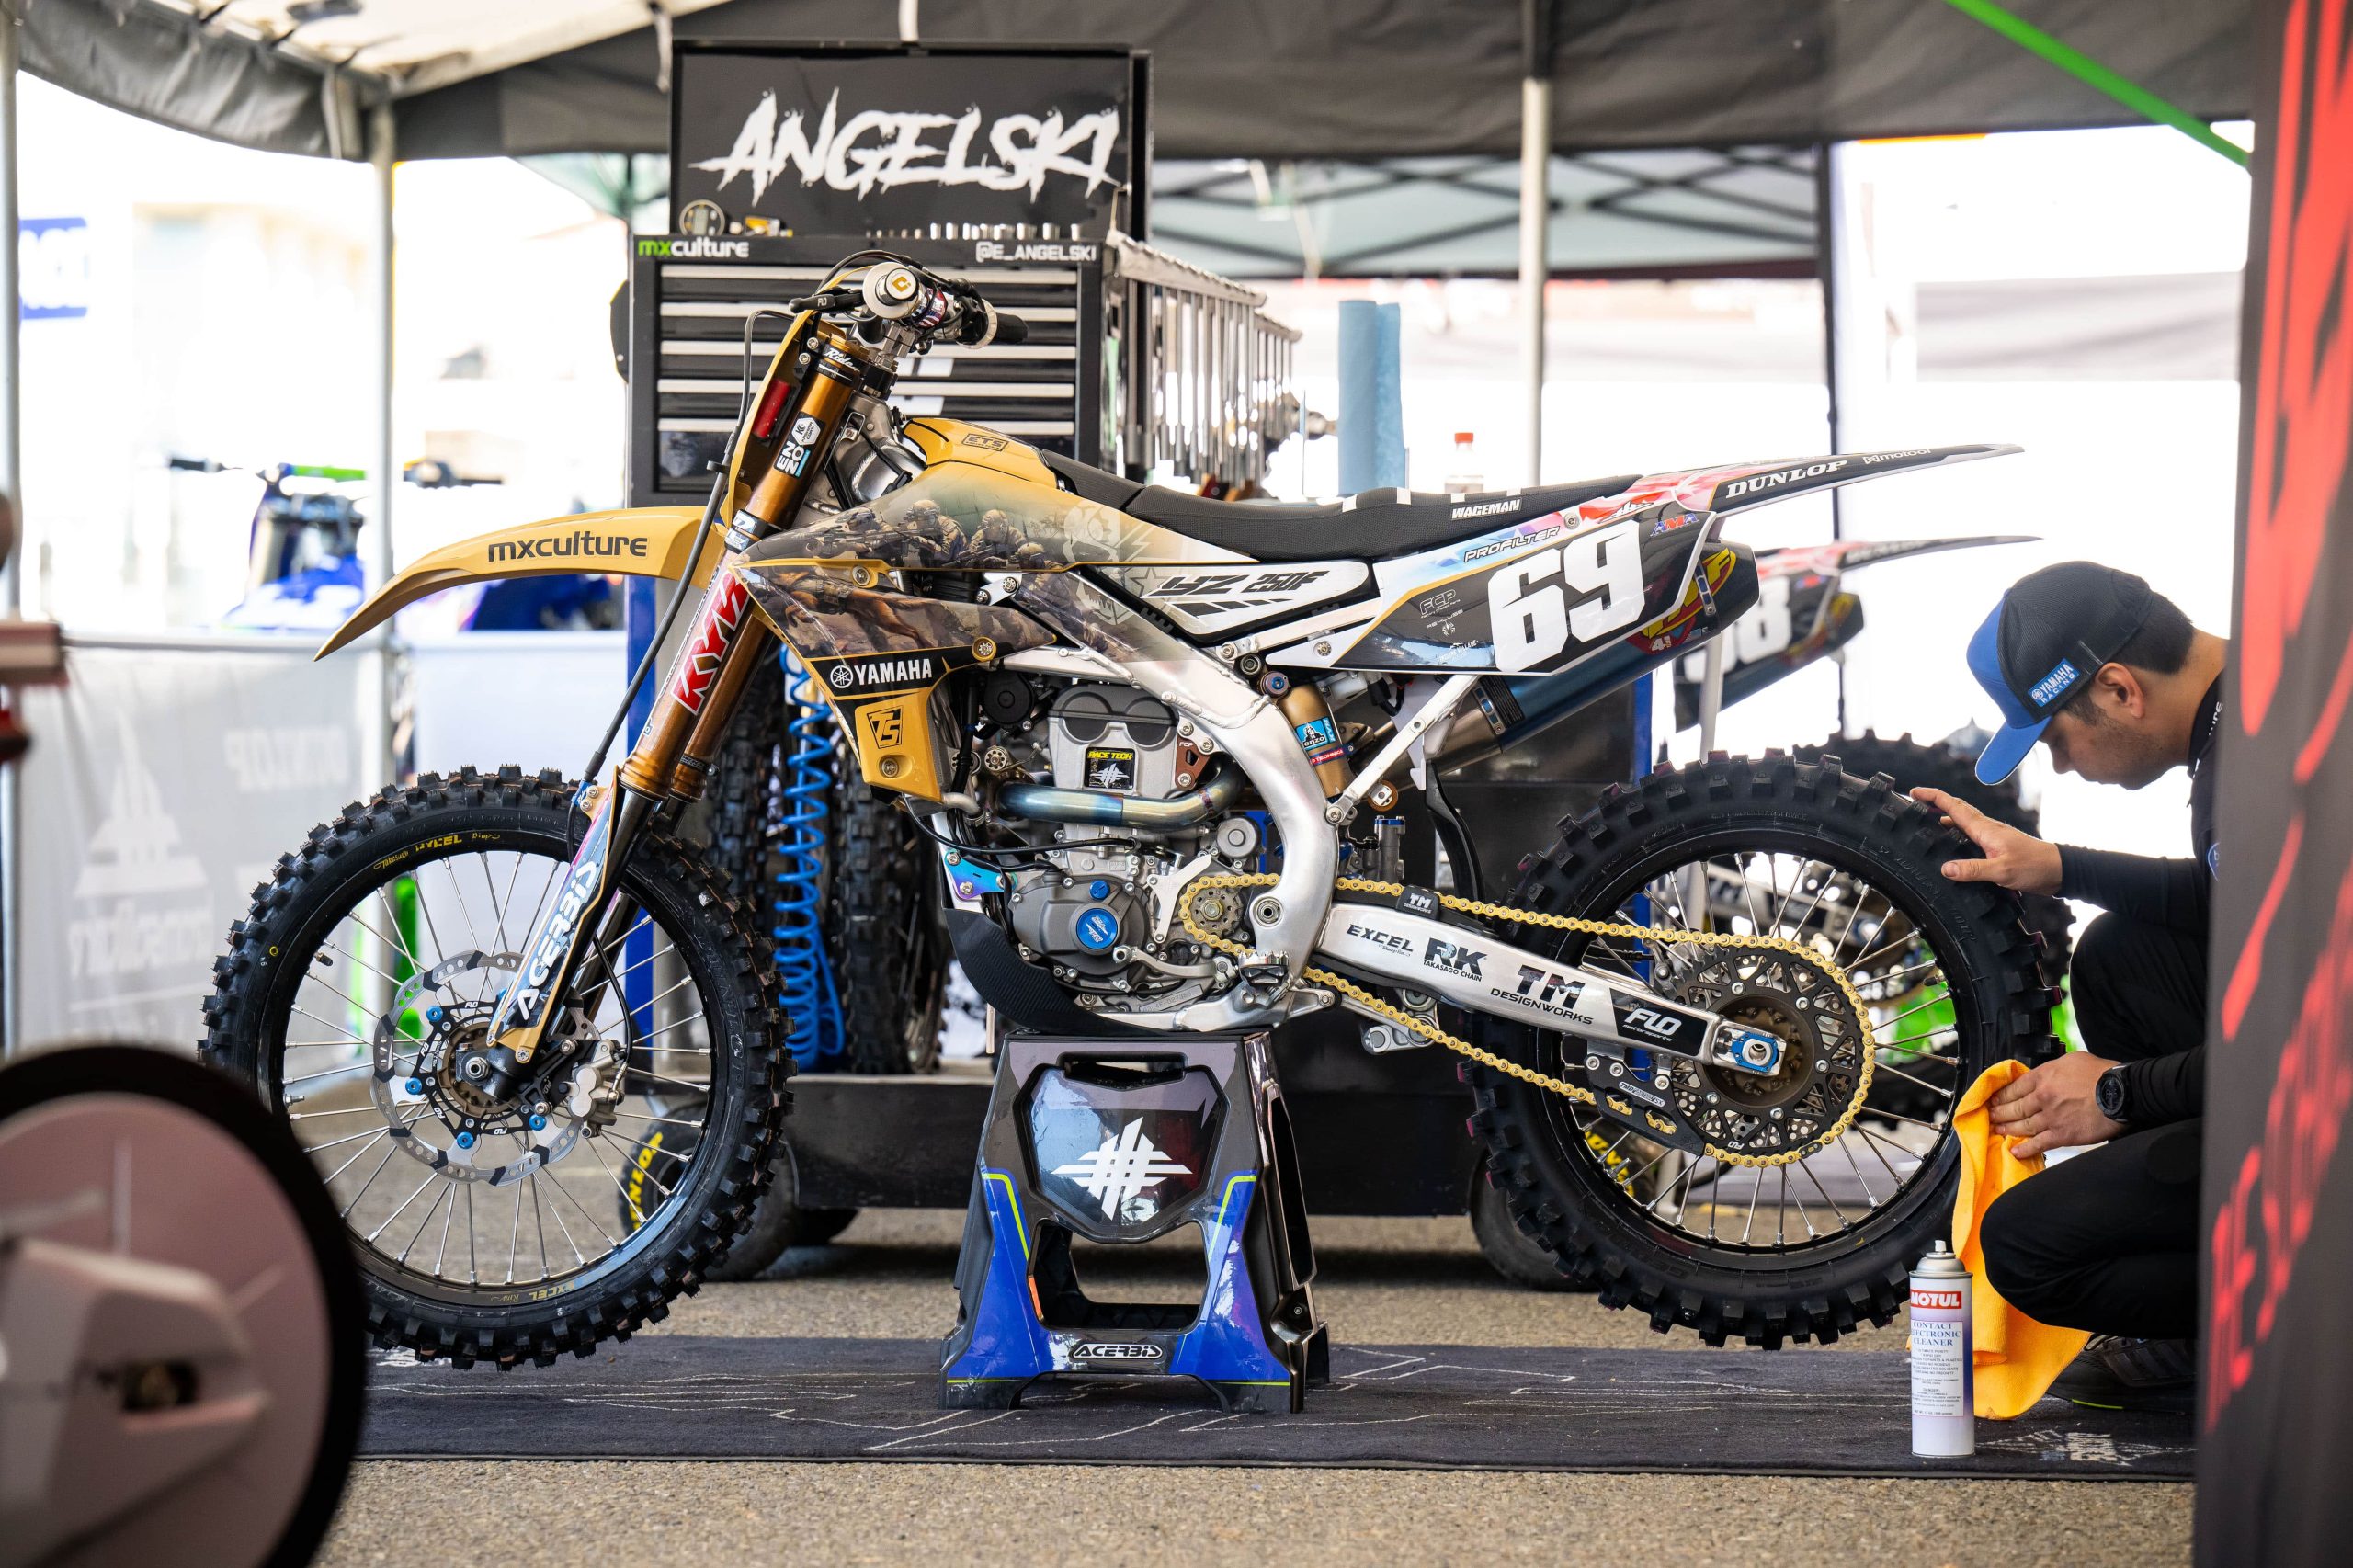 Team Solitaire/Nuclear Blast Yamaha 250SX Class rider Robbie Wageman’s bike decaled in limited-edition military appreciation kit for Round 3 in San Diego.